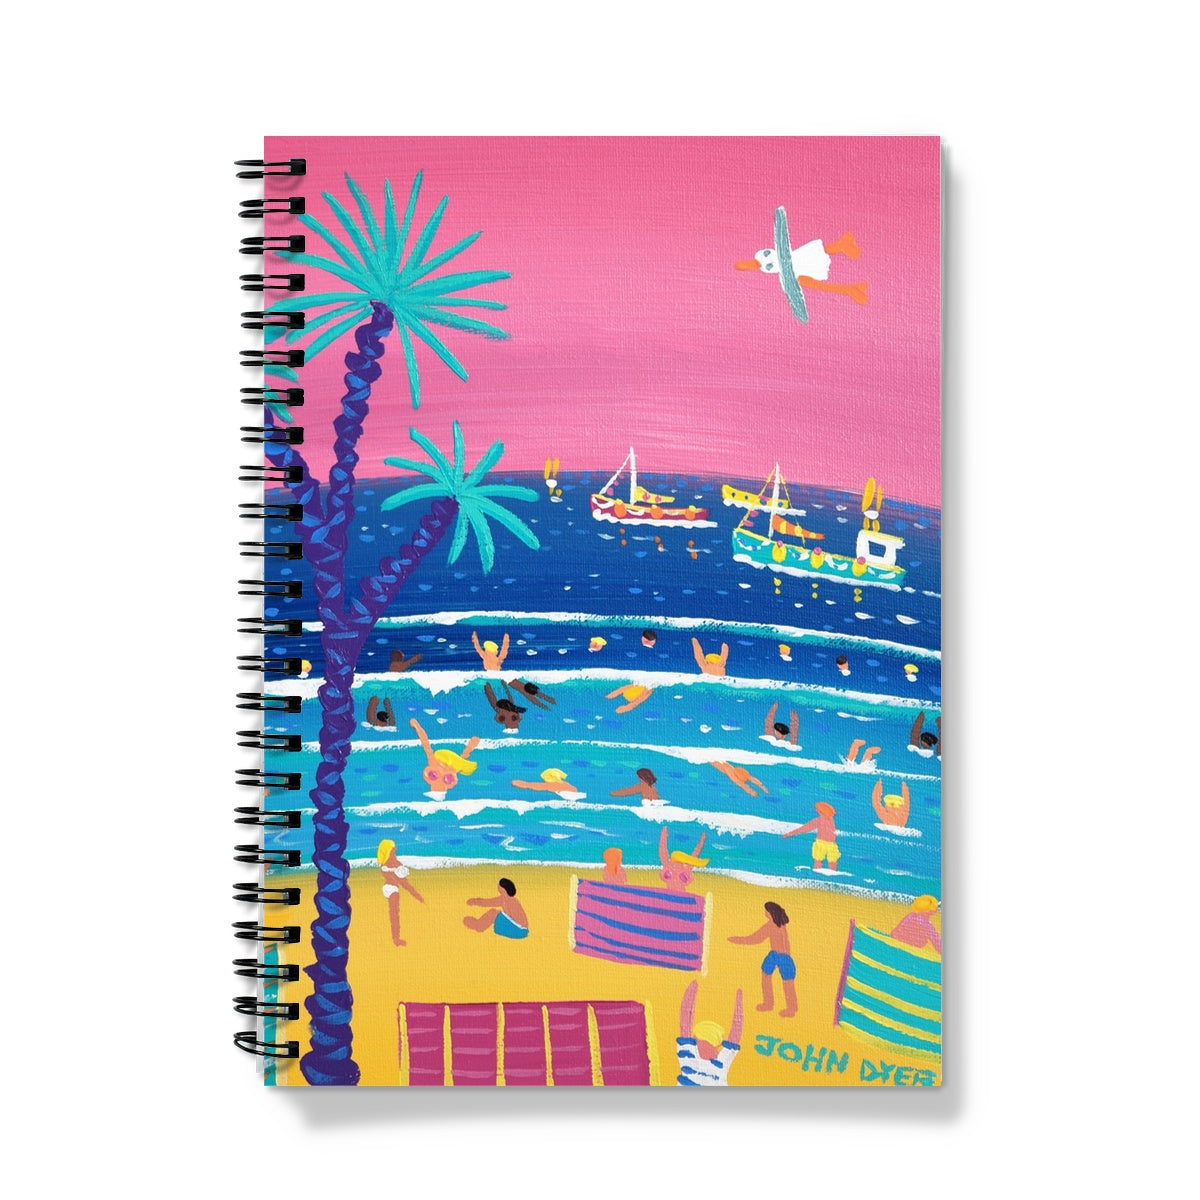 &#39;Evening Skies on a Hot Summer Day&#39; Cornish Contemporary Art Notebook by John Dyer